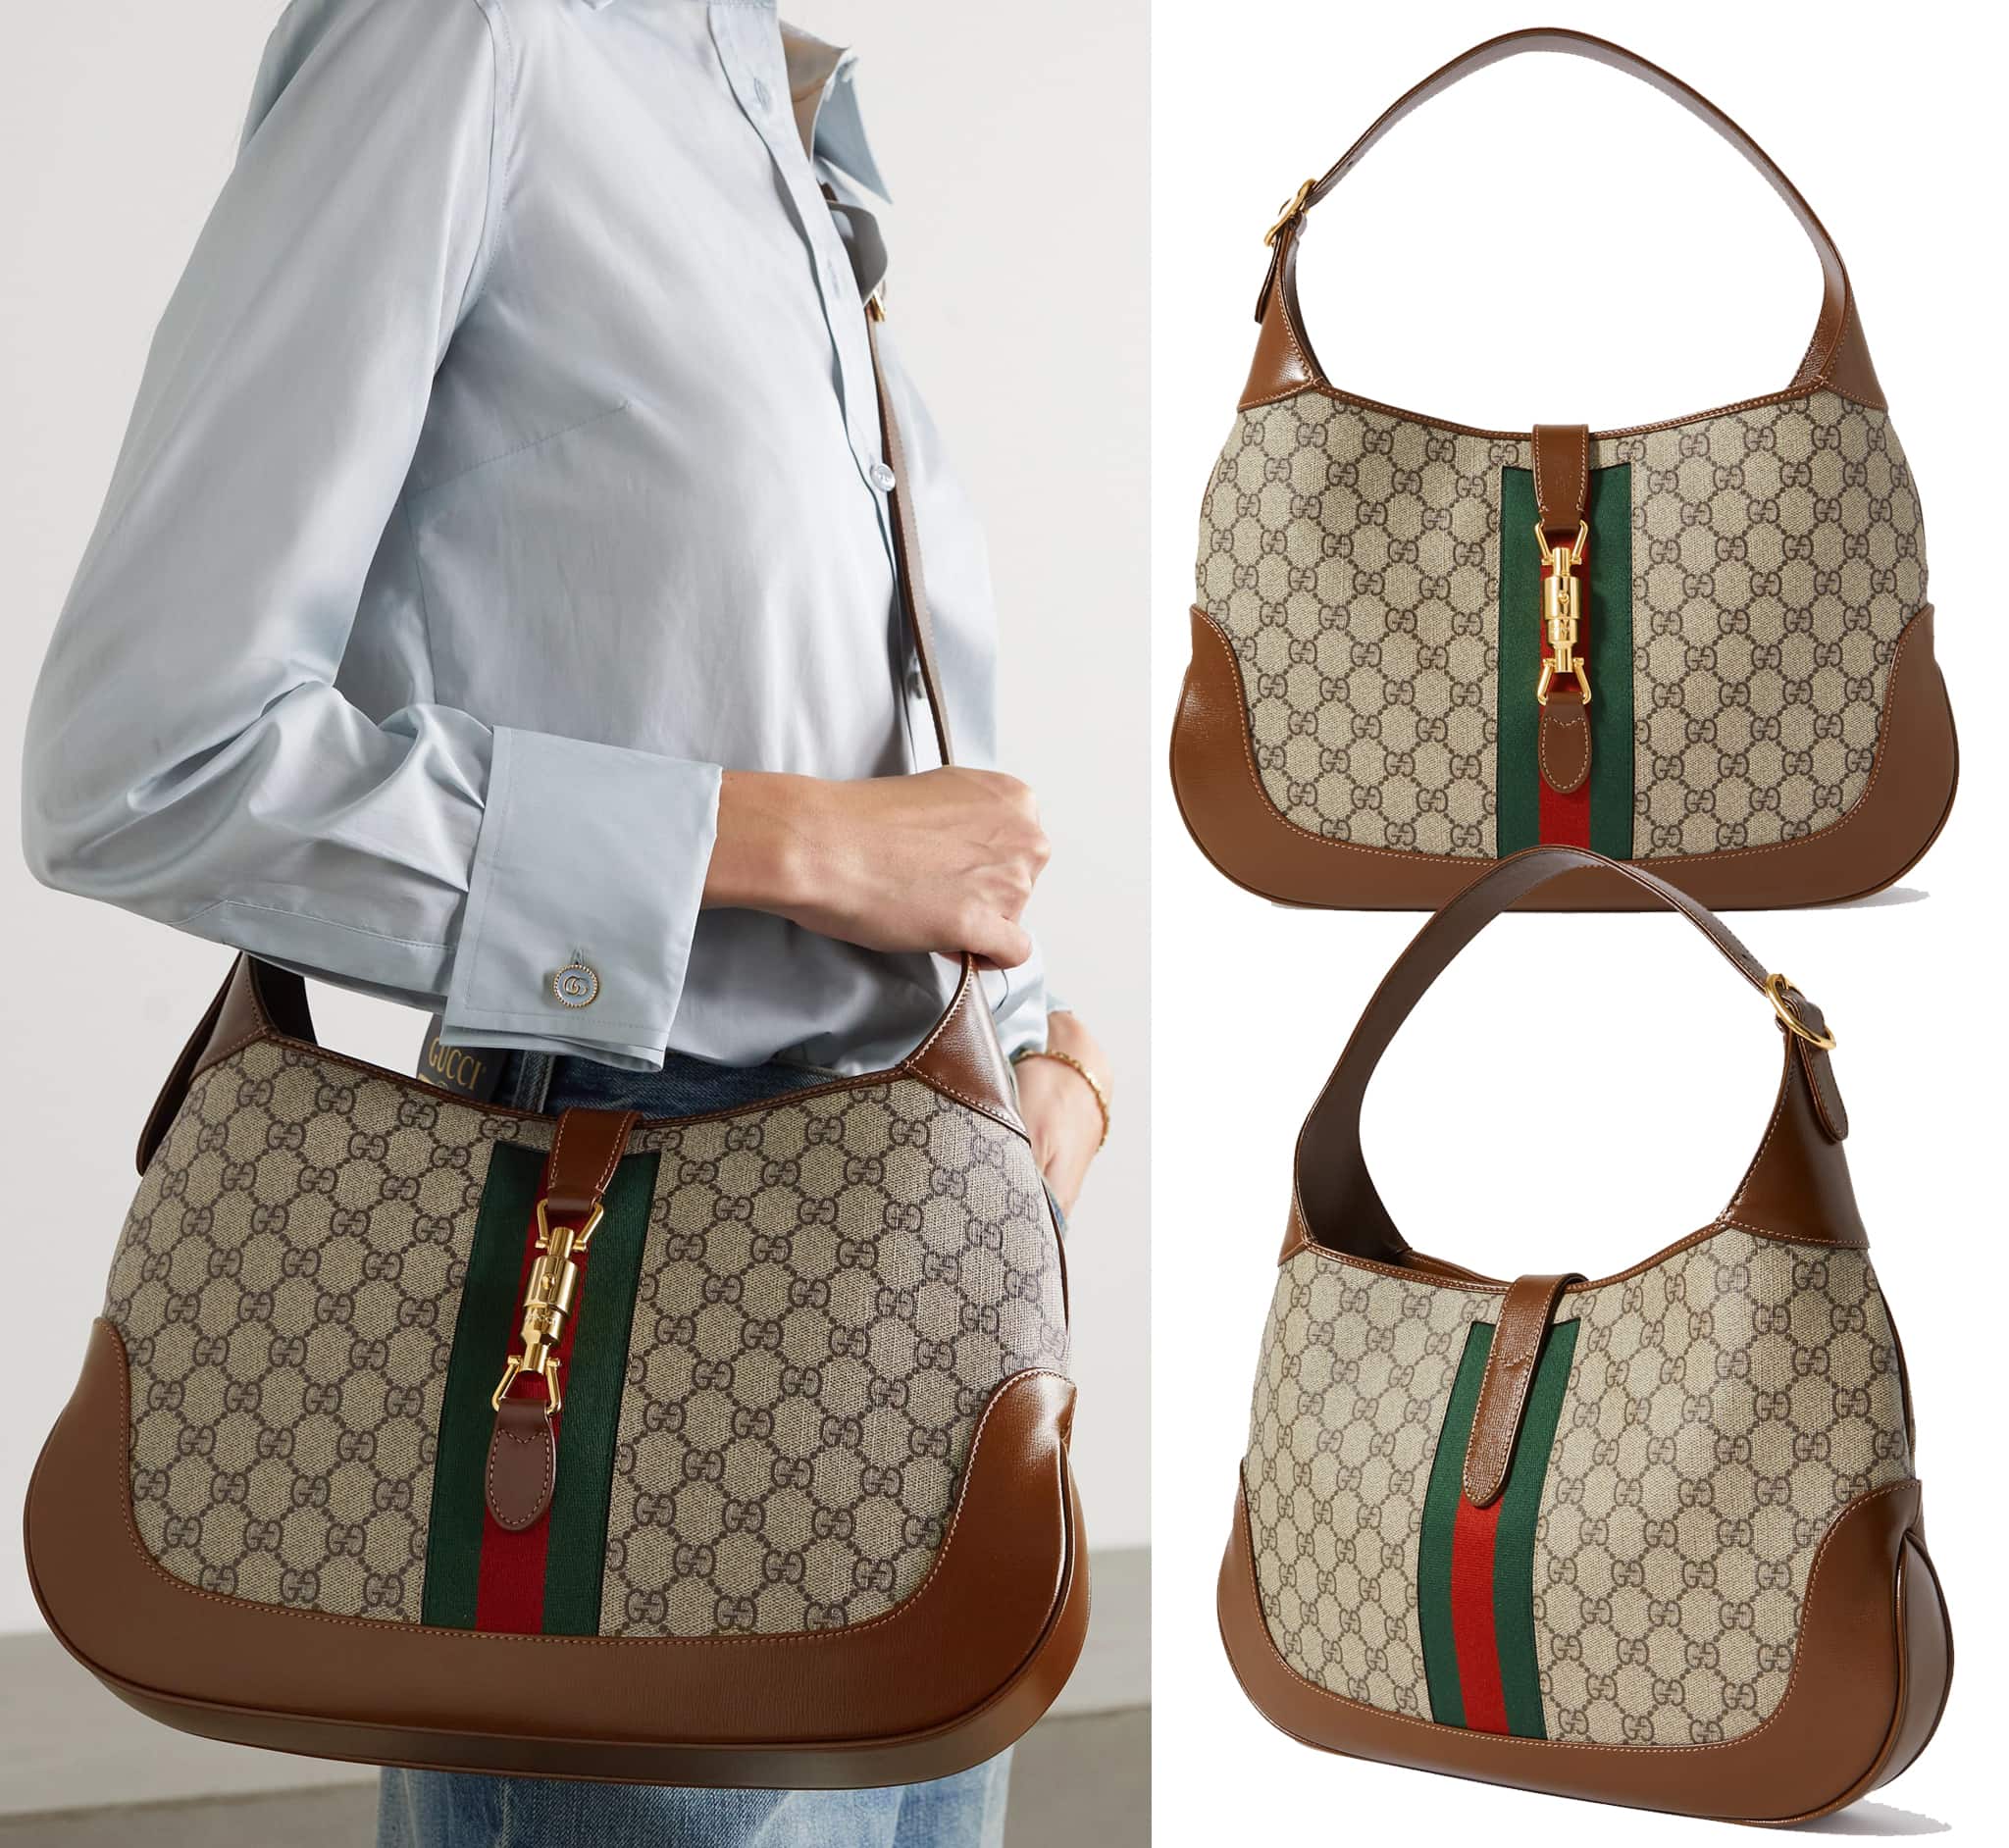 Revived from the archive, the Gucci Jackie 1961 is made from GG Supreme canvas and comes with a detachable shoulder strap that adds a contemporary feel to the archival design